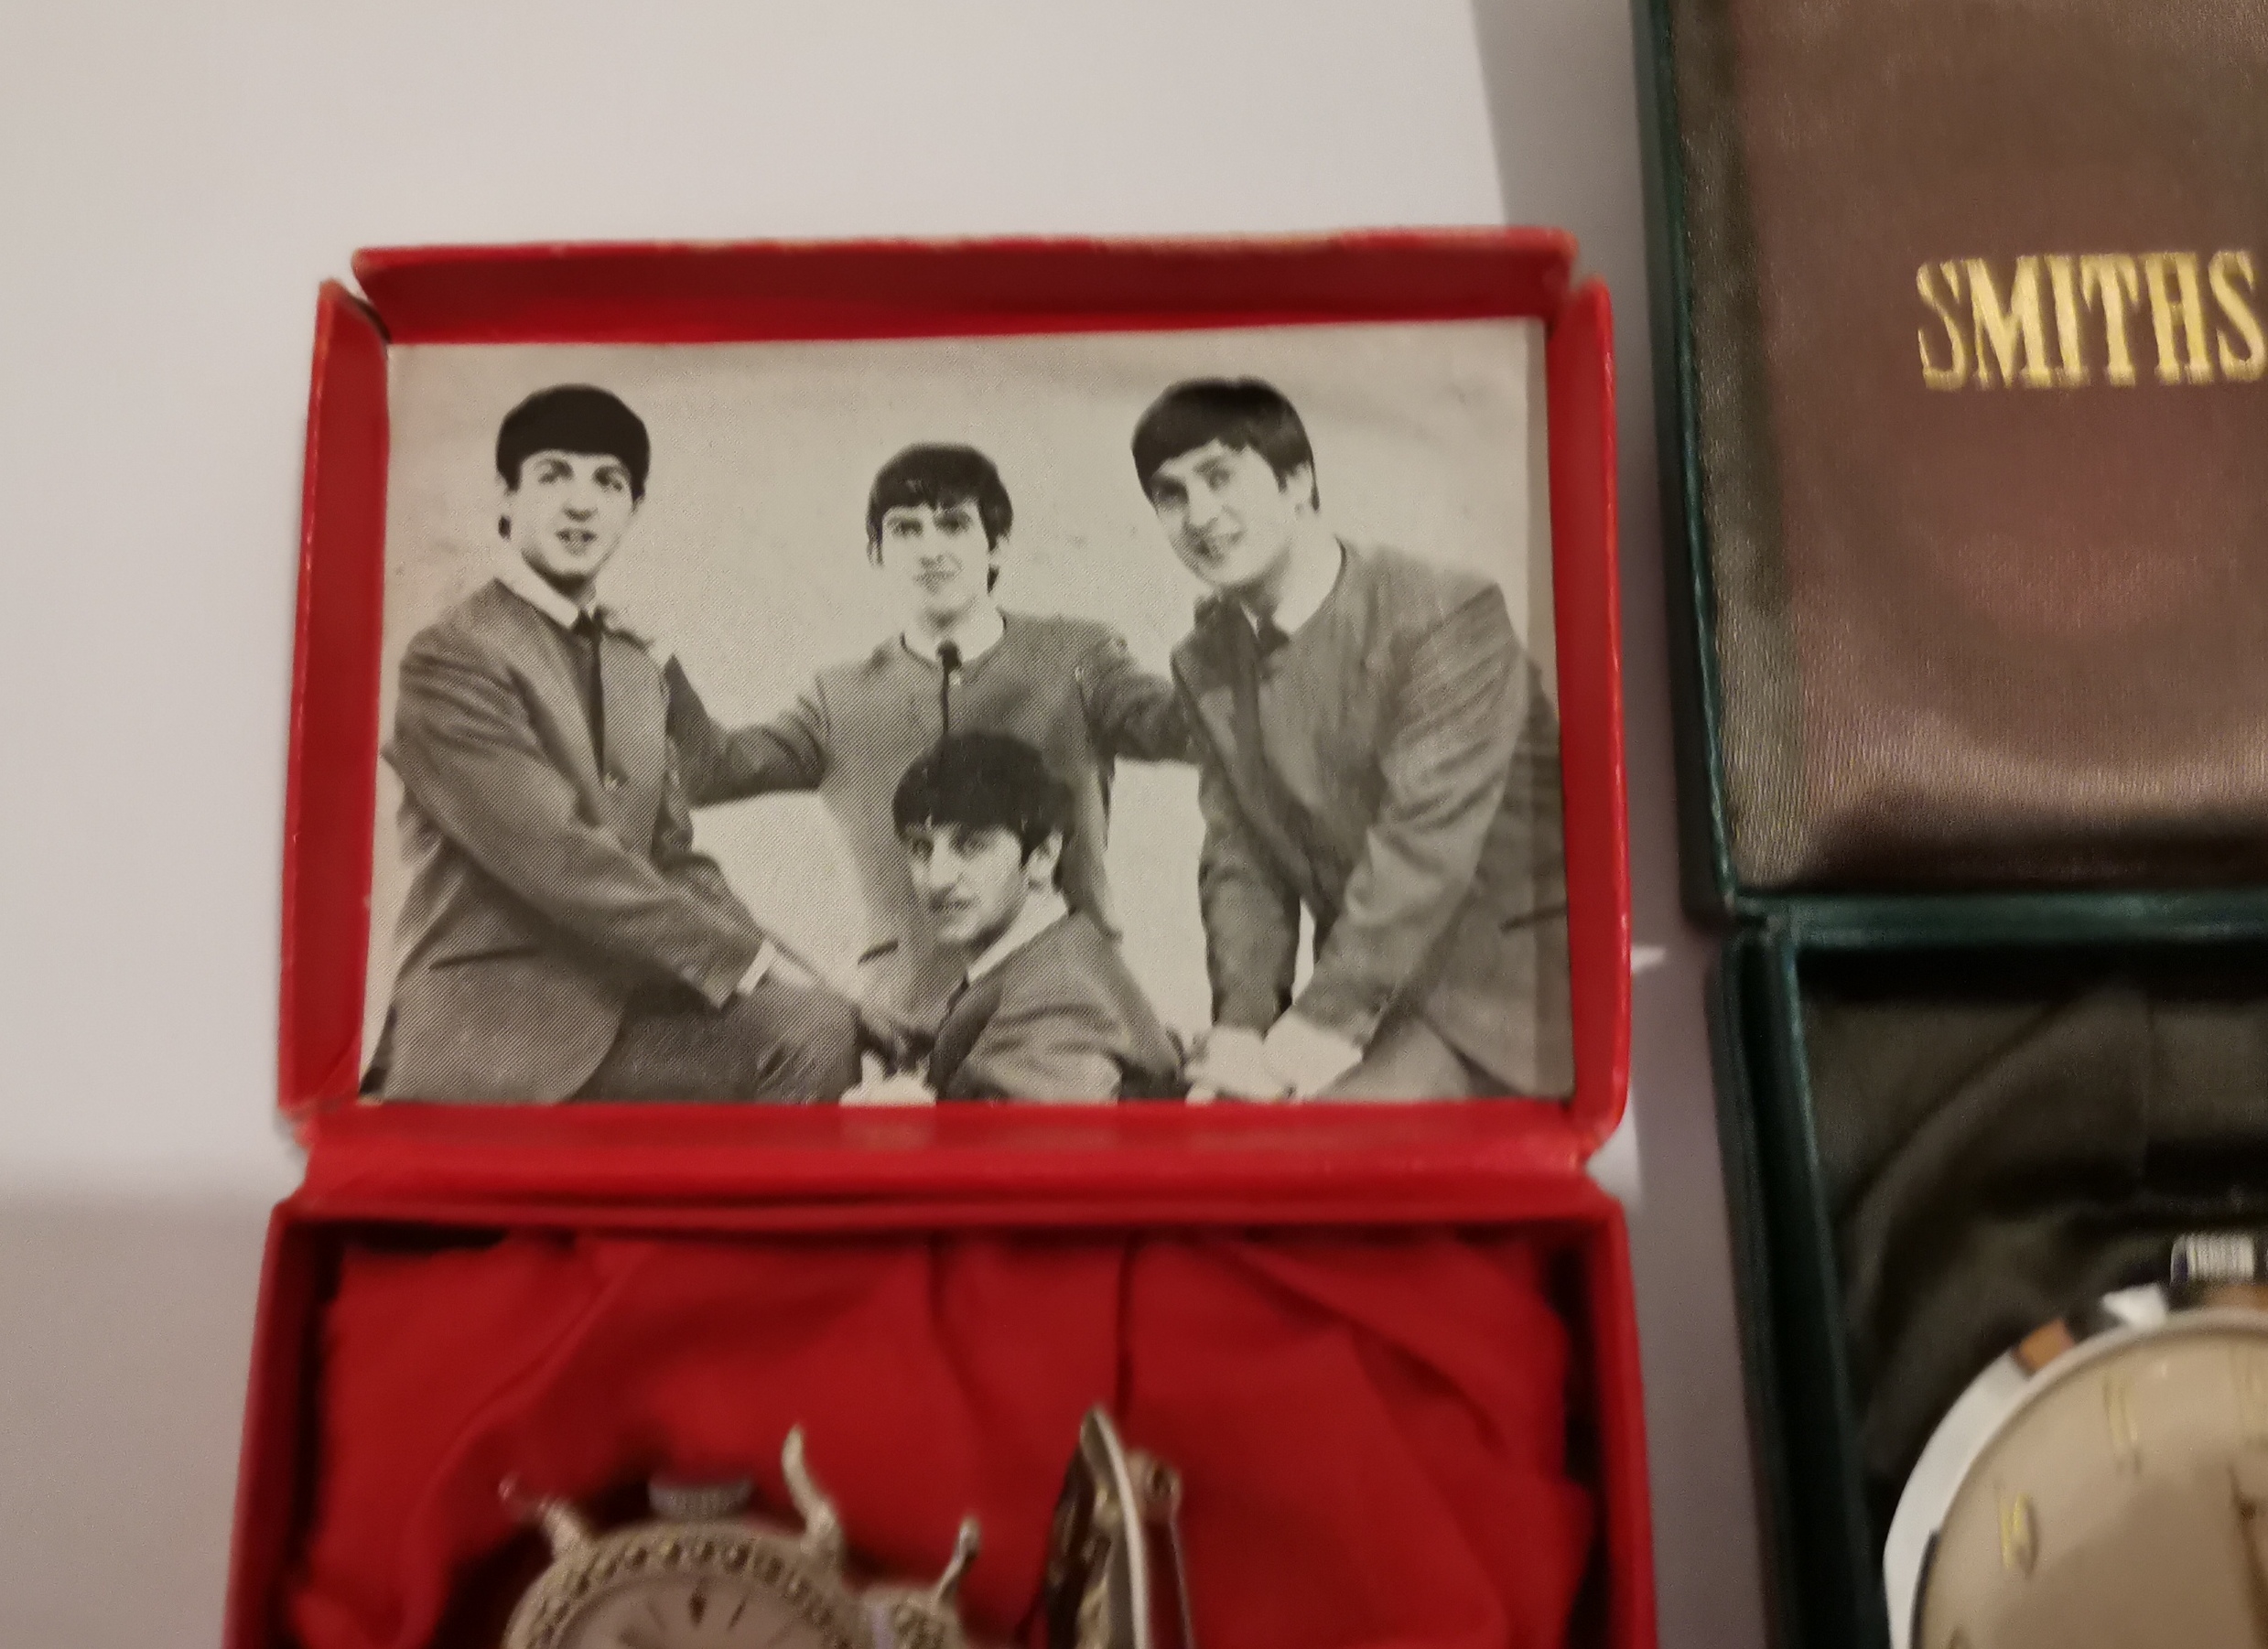 Vintage Boxed "The Beatles" Beetle Watch in an working condition by Smiths plus other. - Image 2 of 7